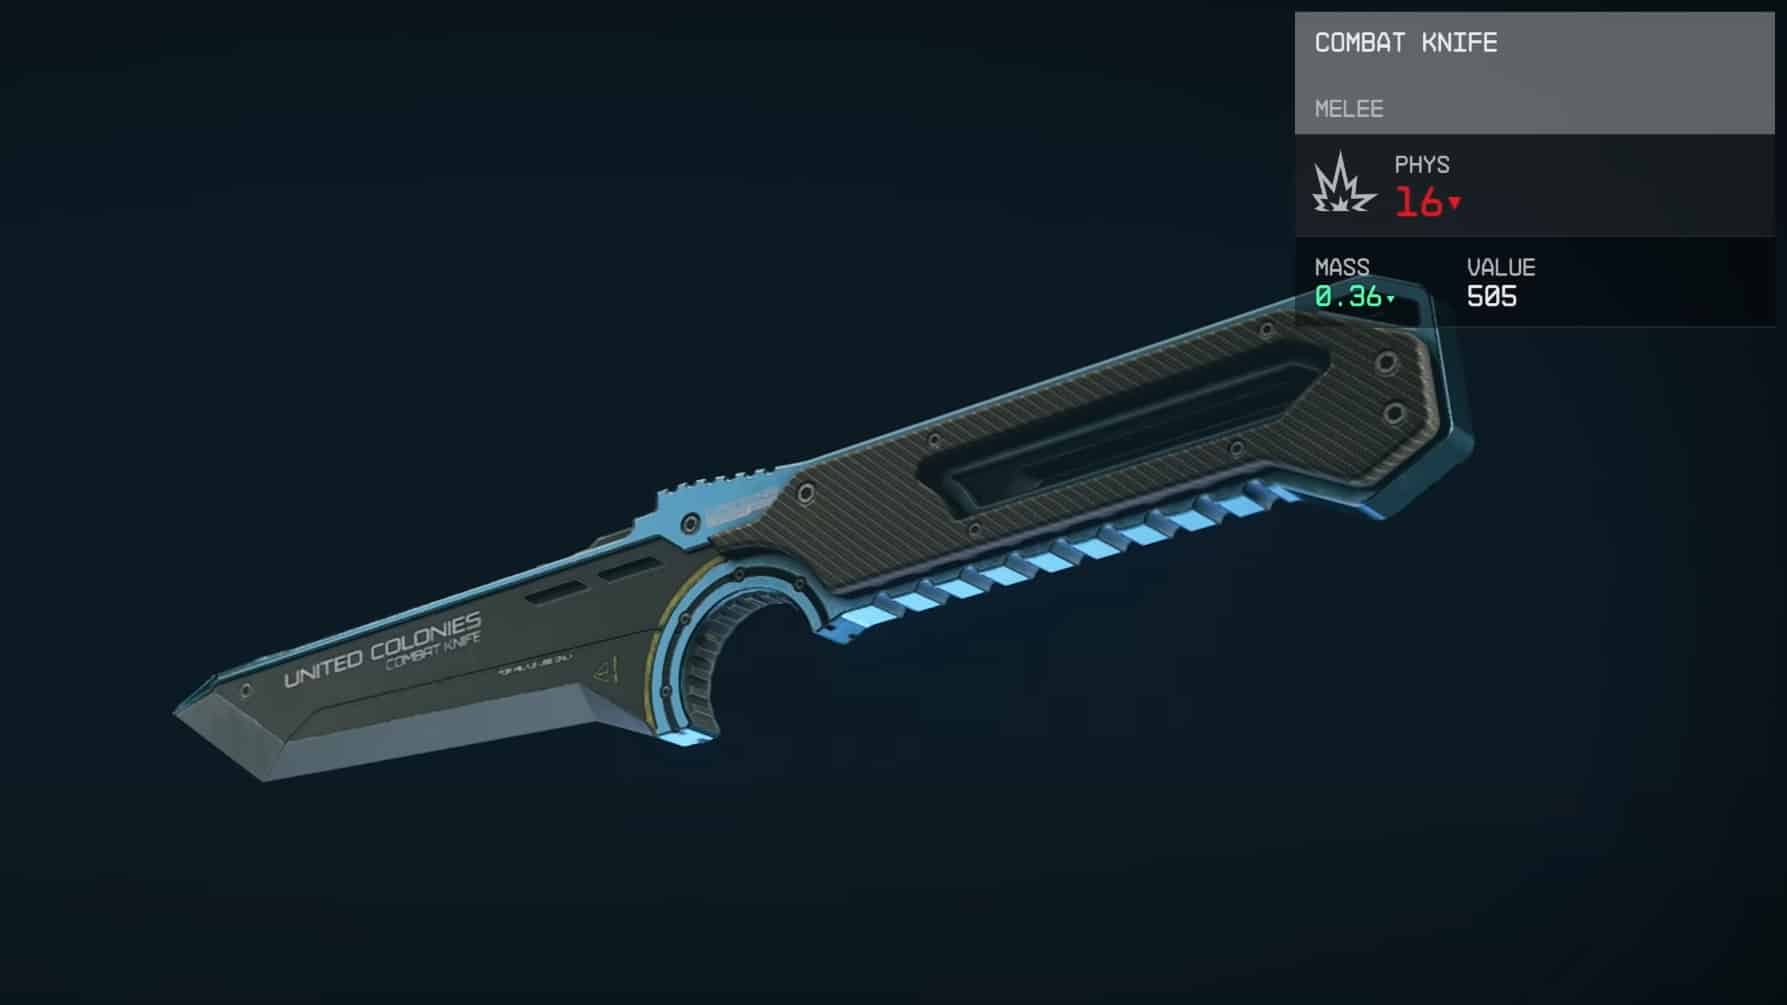 Starfield weapons guide: A United Colonies Combat Knife on display in the inventory menu.